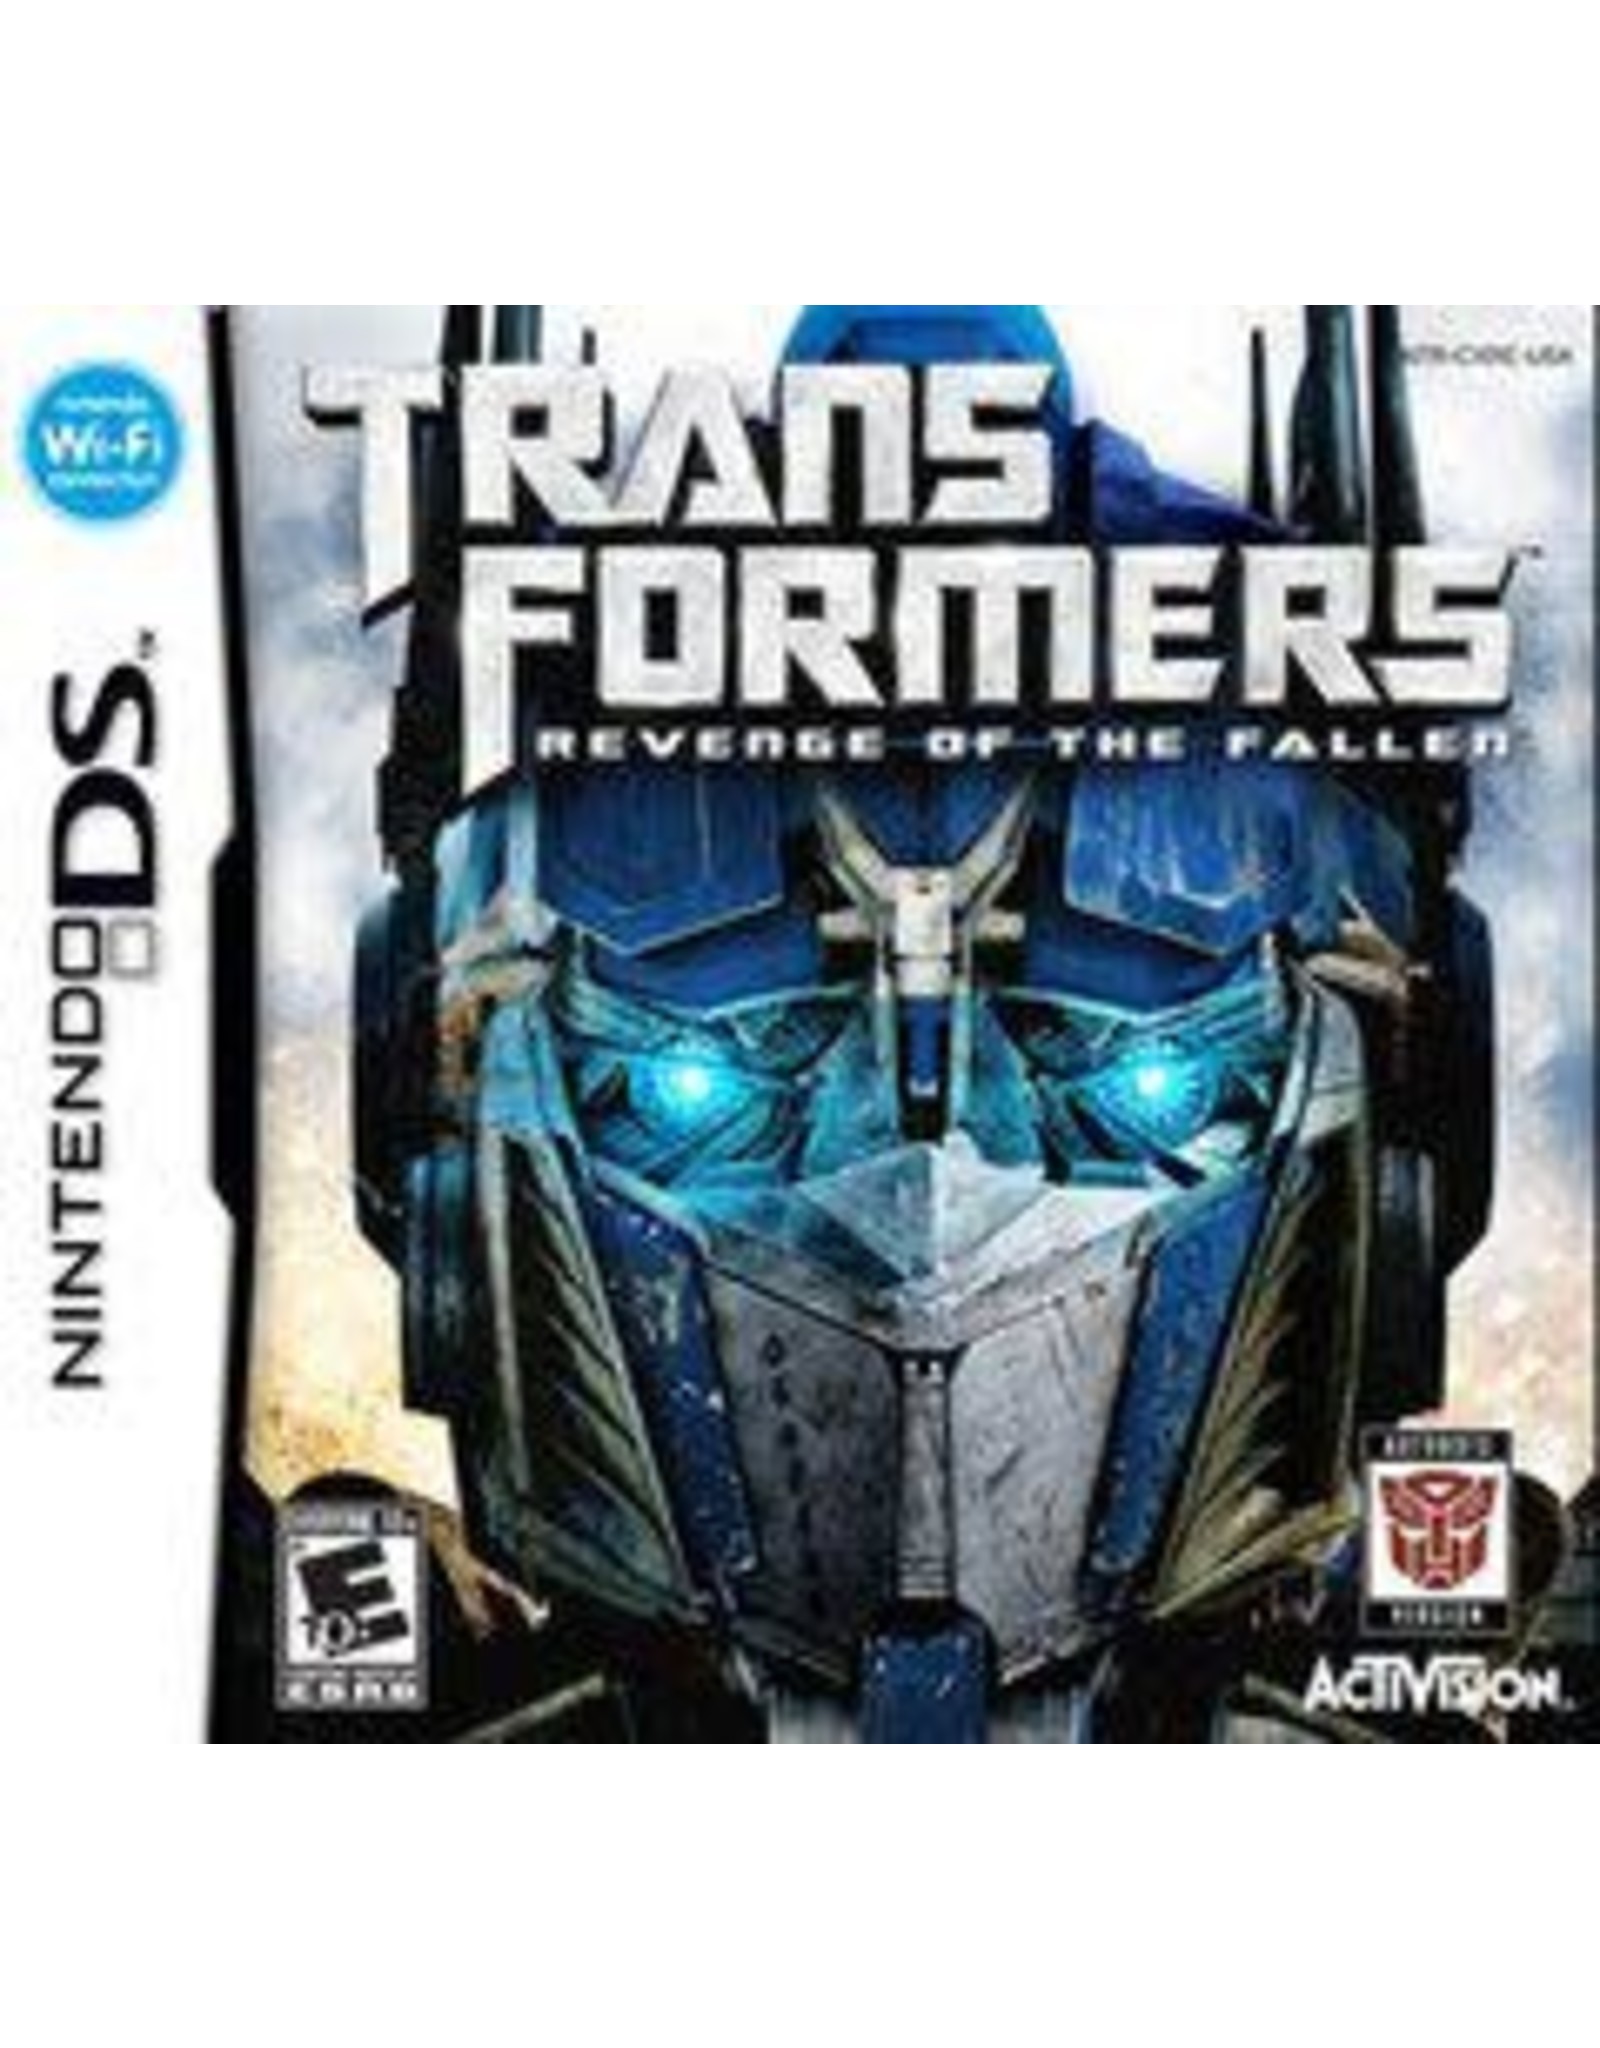 Nintendo DS Transformers: Revenge of the Fallen Autobots (Cart Only, Damaged Cart and Label)